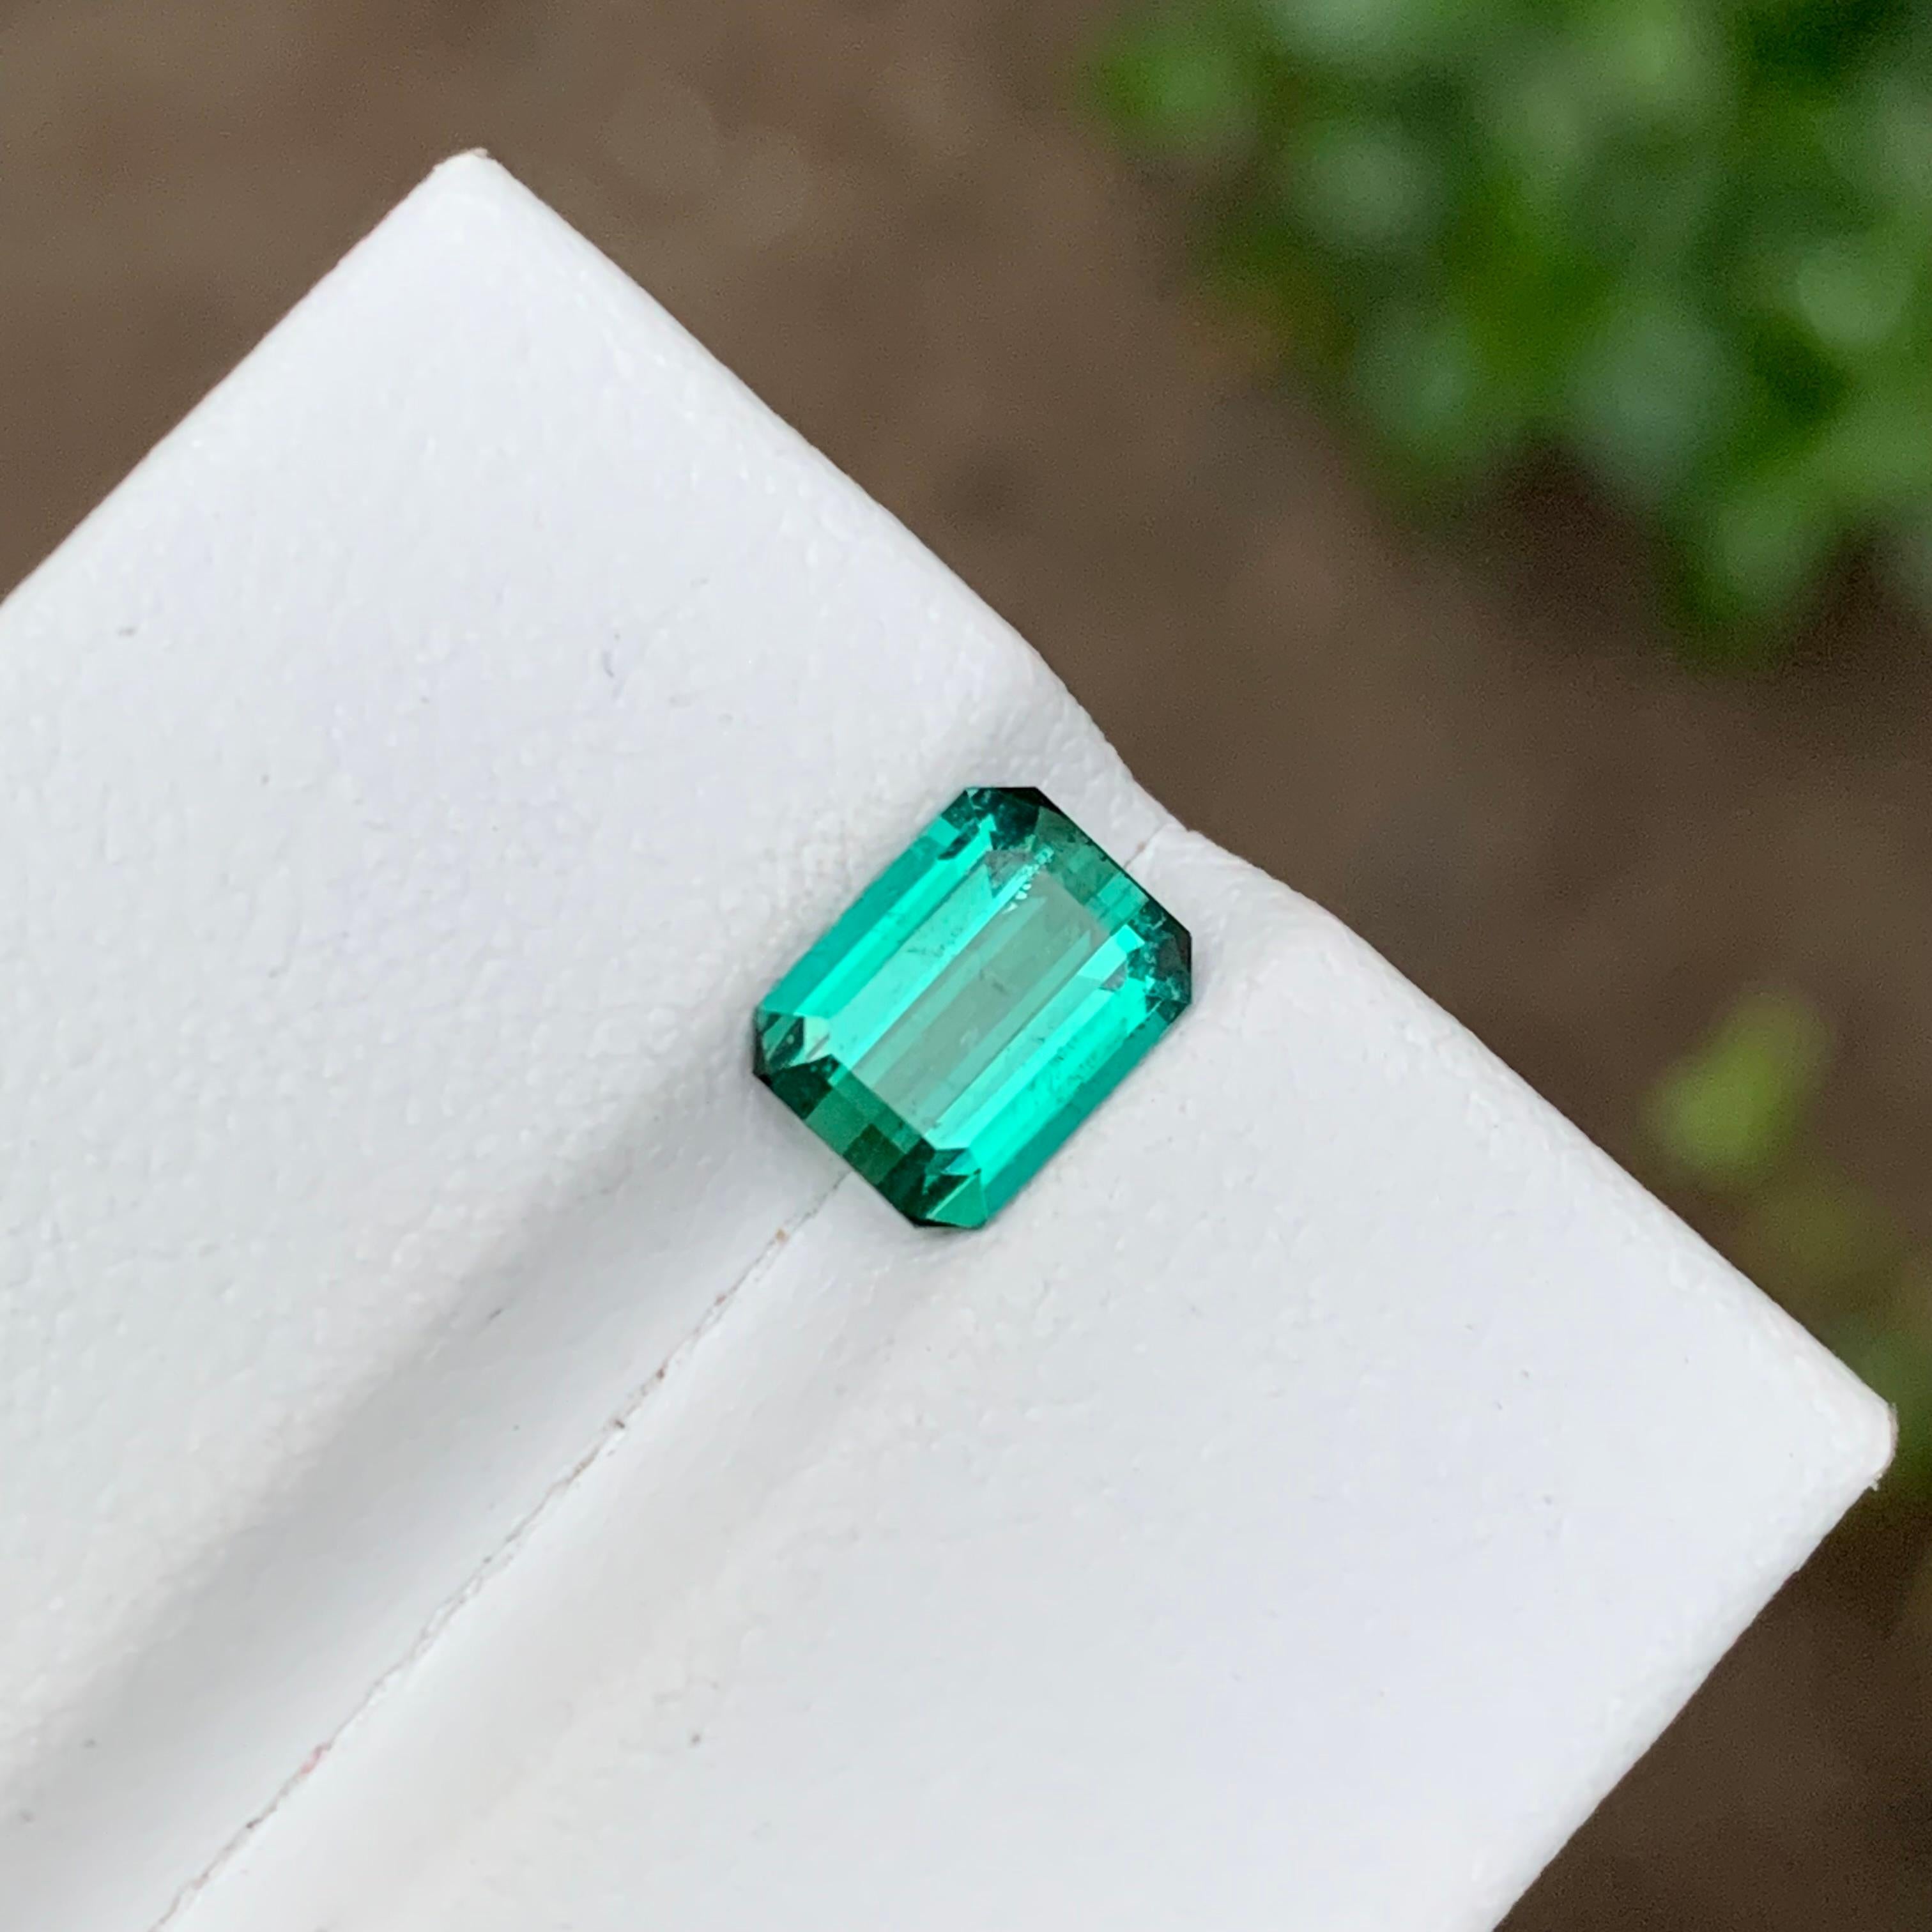 GEMSTONE TYPE: Tourmaline
PIECE(S): 1
WEIGHT: 1.35 Carats
SHAPE: Emerald
SIZE (MM): 7.49 x 5.79 x 3.38
COLOR: Vibrant Bluish Neon Green
CLARITY: Slightly Included 
TREATMENT: None
ORIGIN: Afghanistan
CERTIFICATE: On demand

Introducing our exquisite